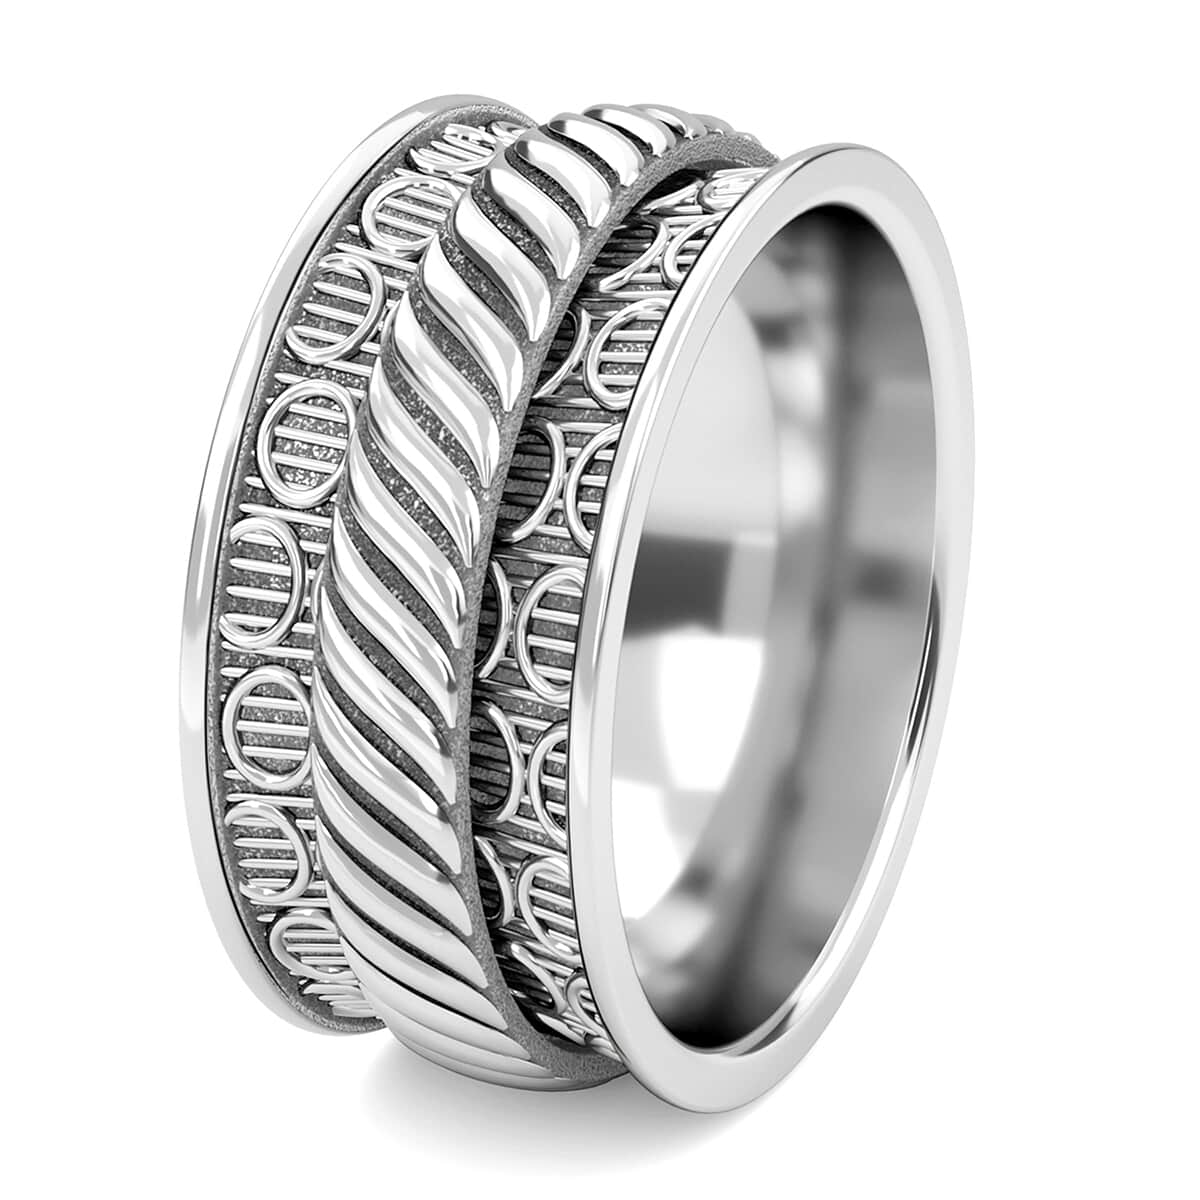 Sterling Silver Spinner Ring, Anxiety Ring for Women, Fidget Rings for Anxiety for Women, Stress Relieving Anxiety Ring (Size 10.0) (4.75 g) image number 5